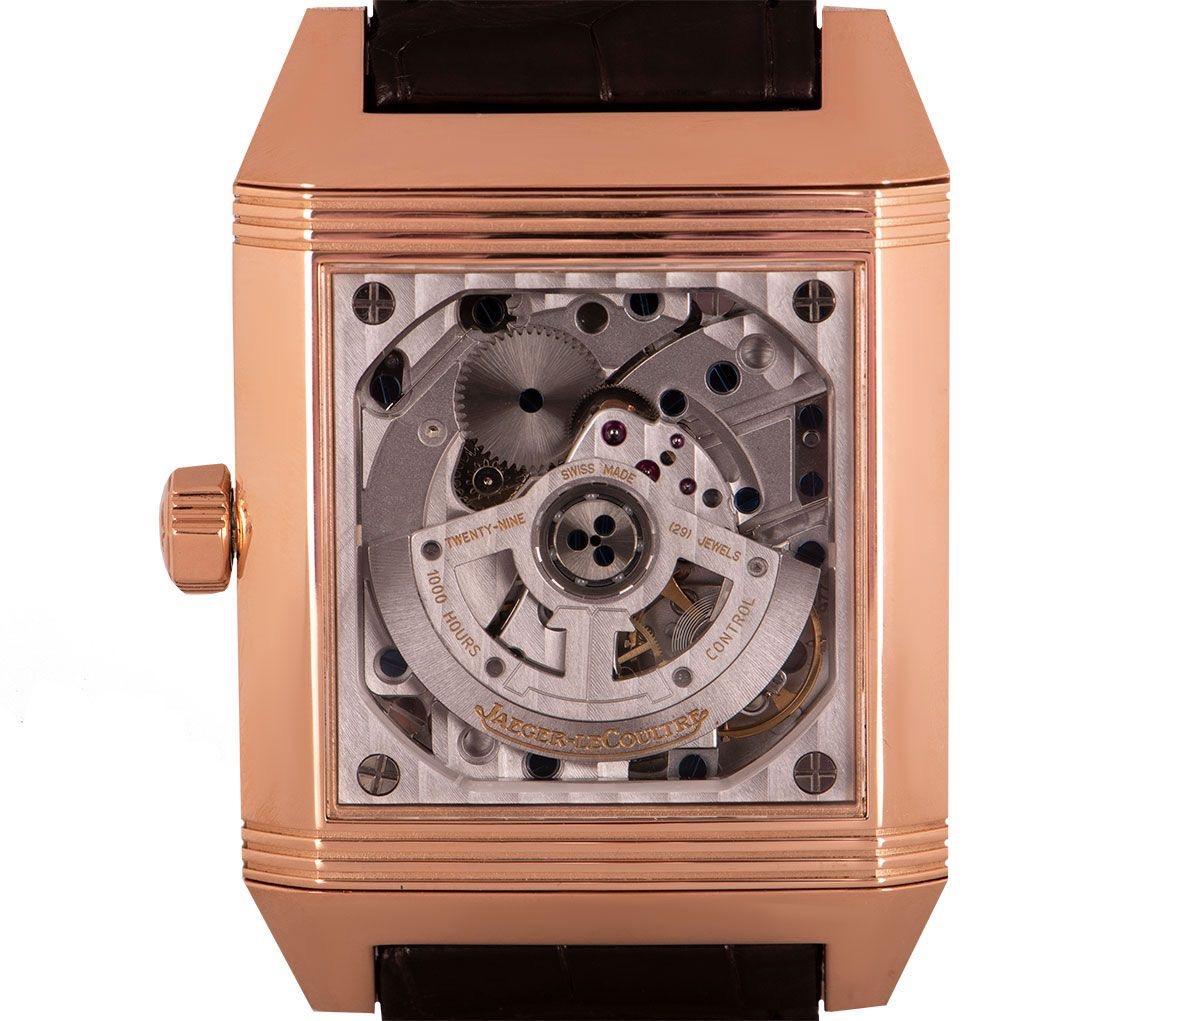 A 35 rose gold Reverso Squadra Hometime by Jaeger LeCoultre, featuring a silver dial with the date, small seconds and an AM/PM indicator. The reverse side has an exhibition case back which shows the watches automatic movement. An original brown